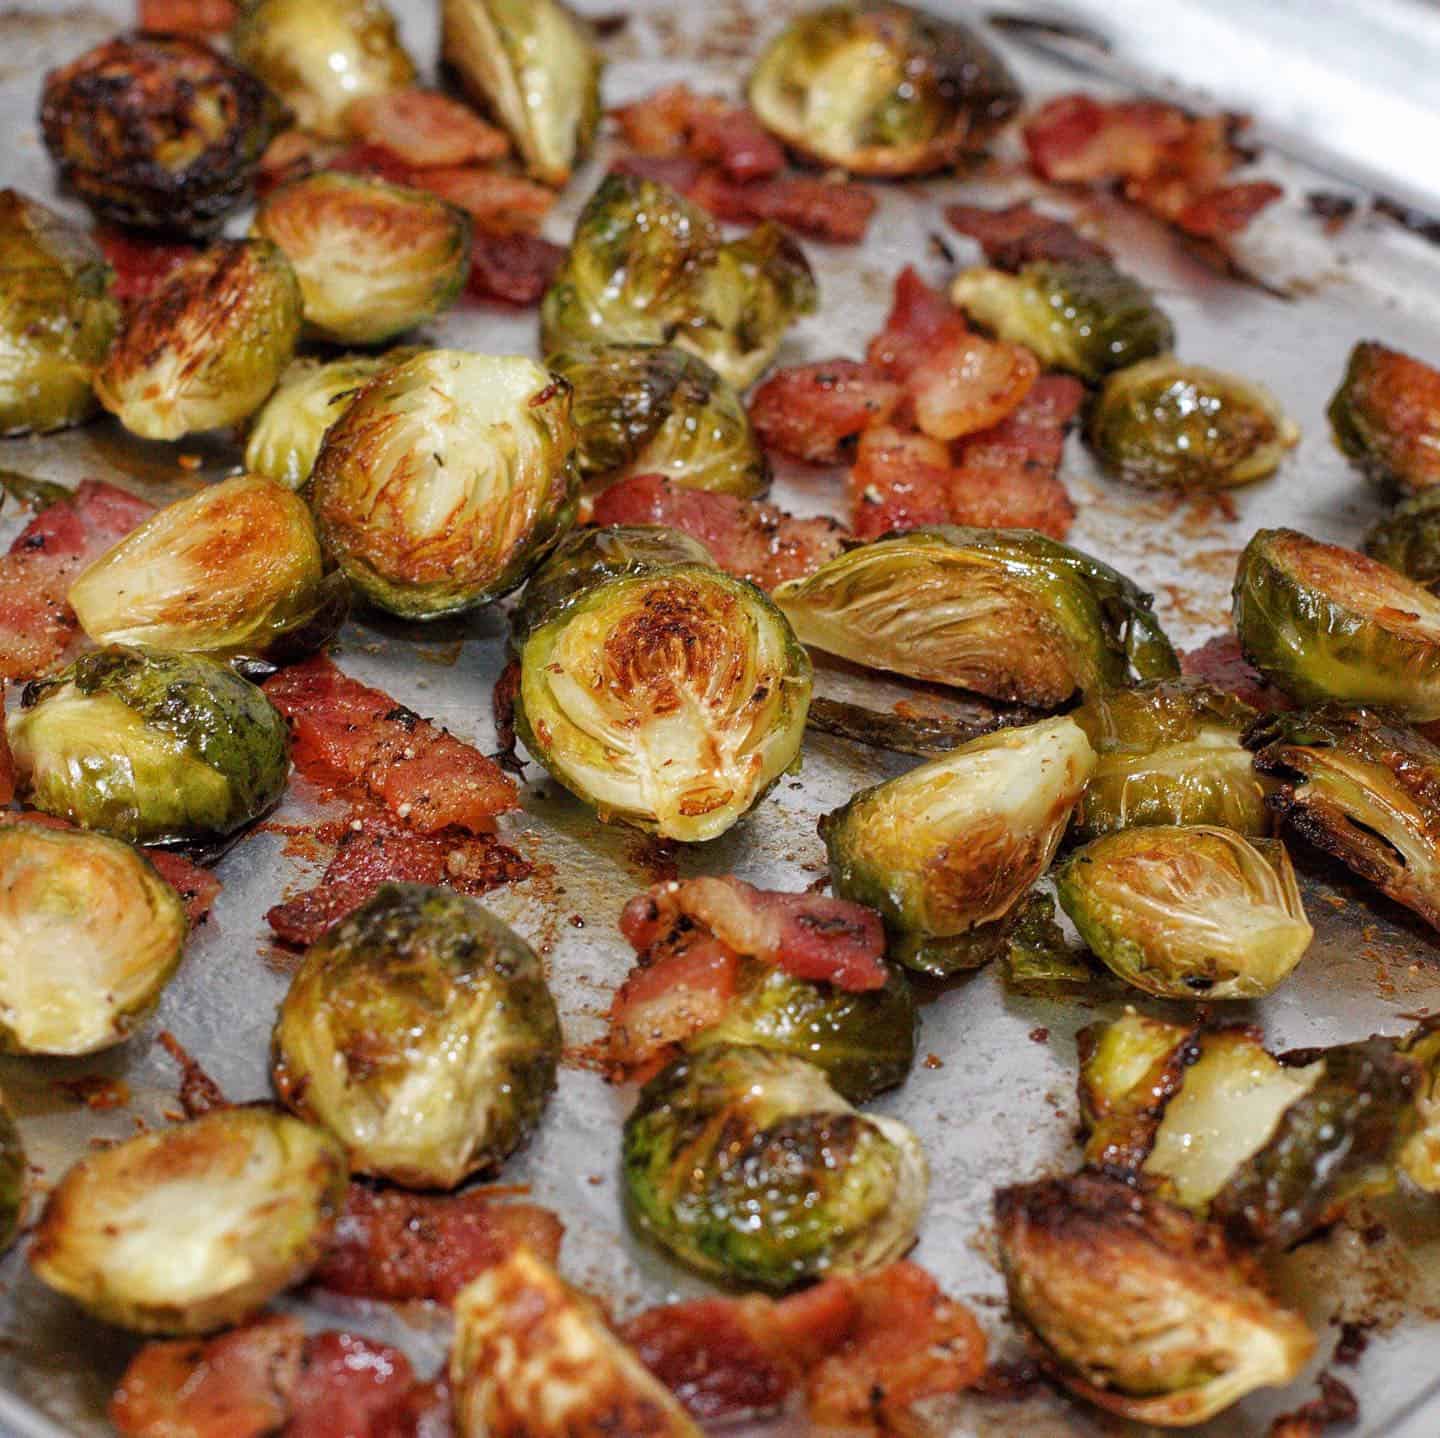 Close up image of the finished Brussels sprouts and crispy bacon.